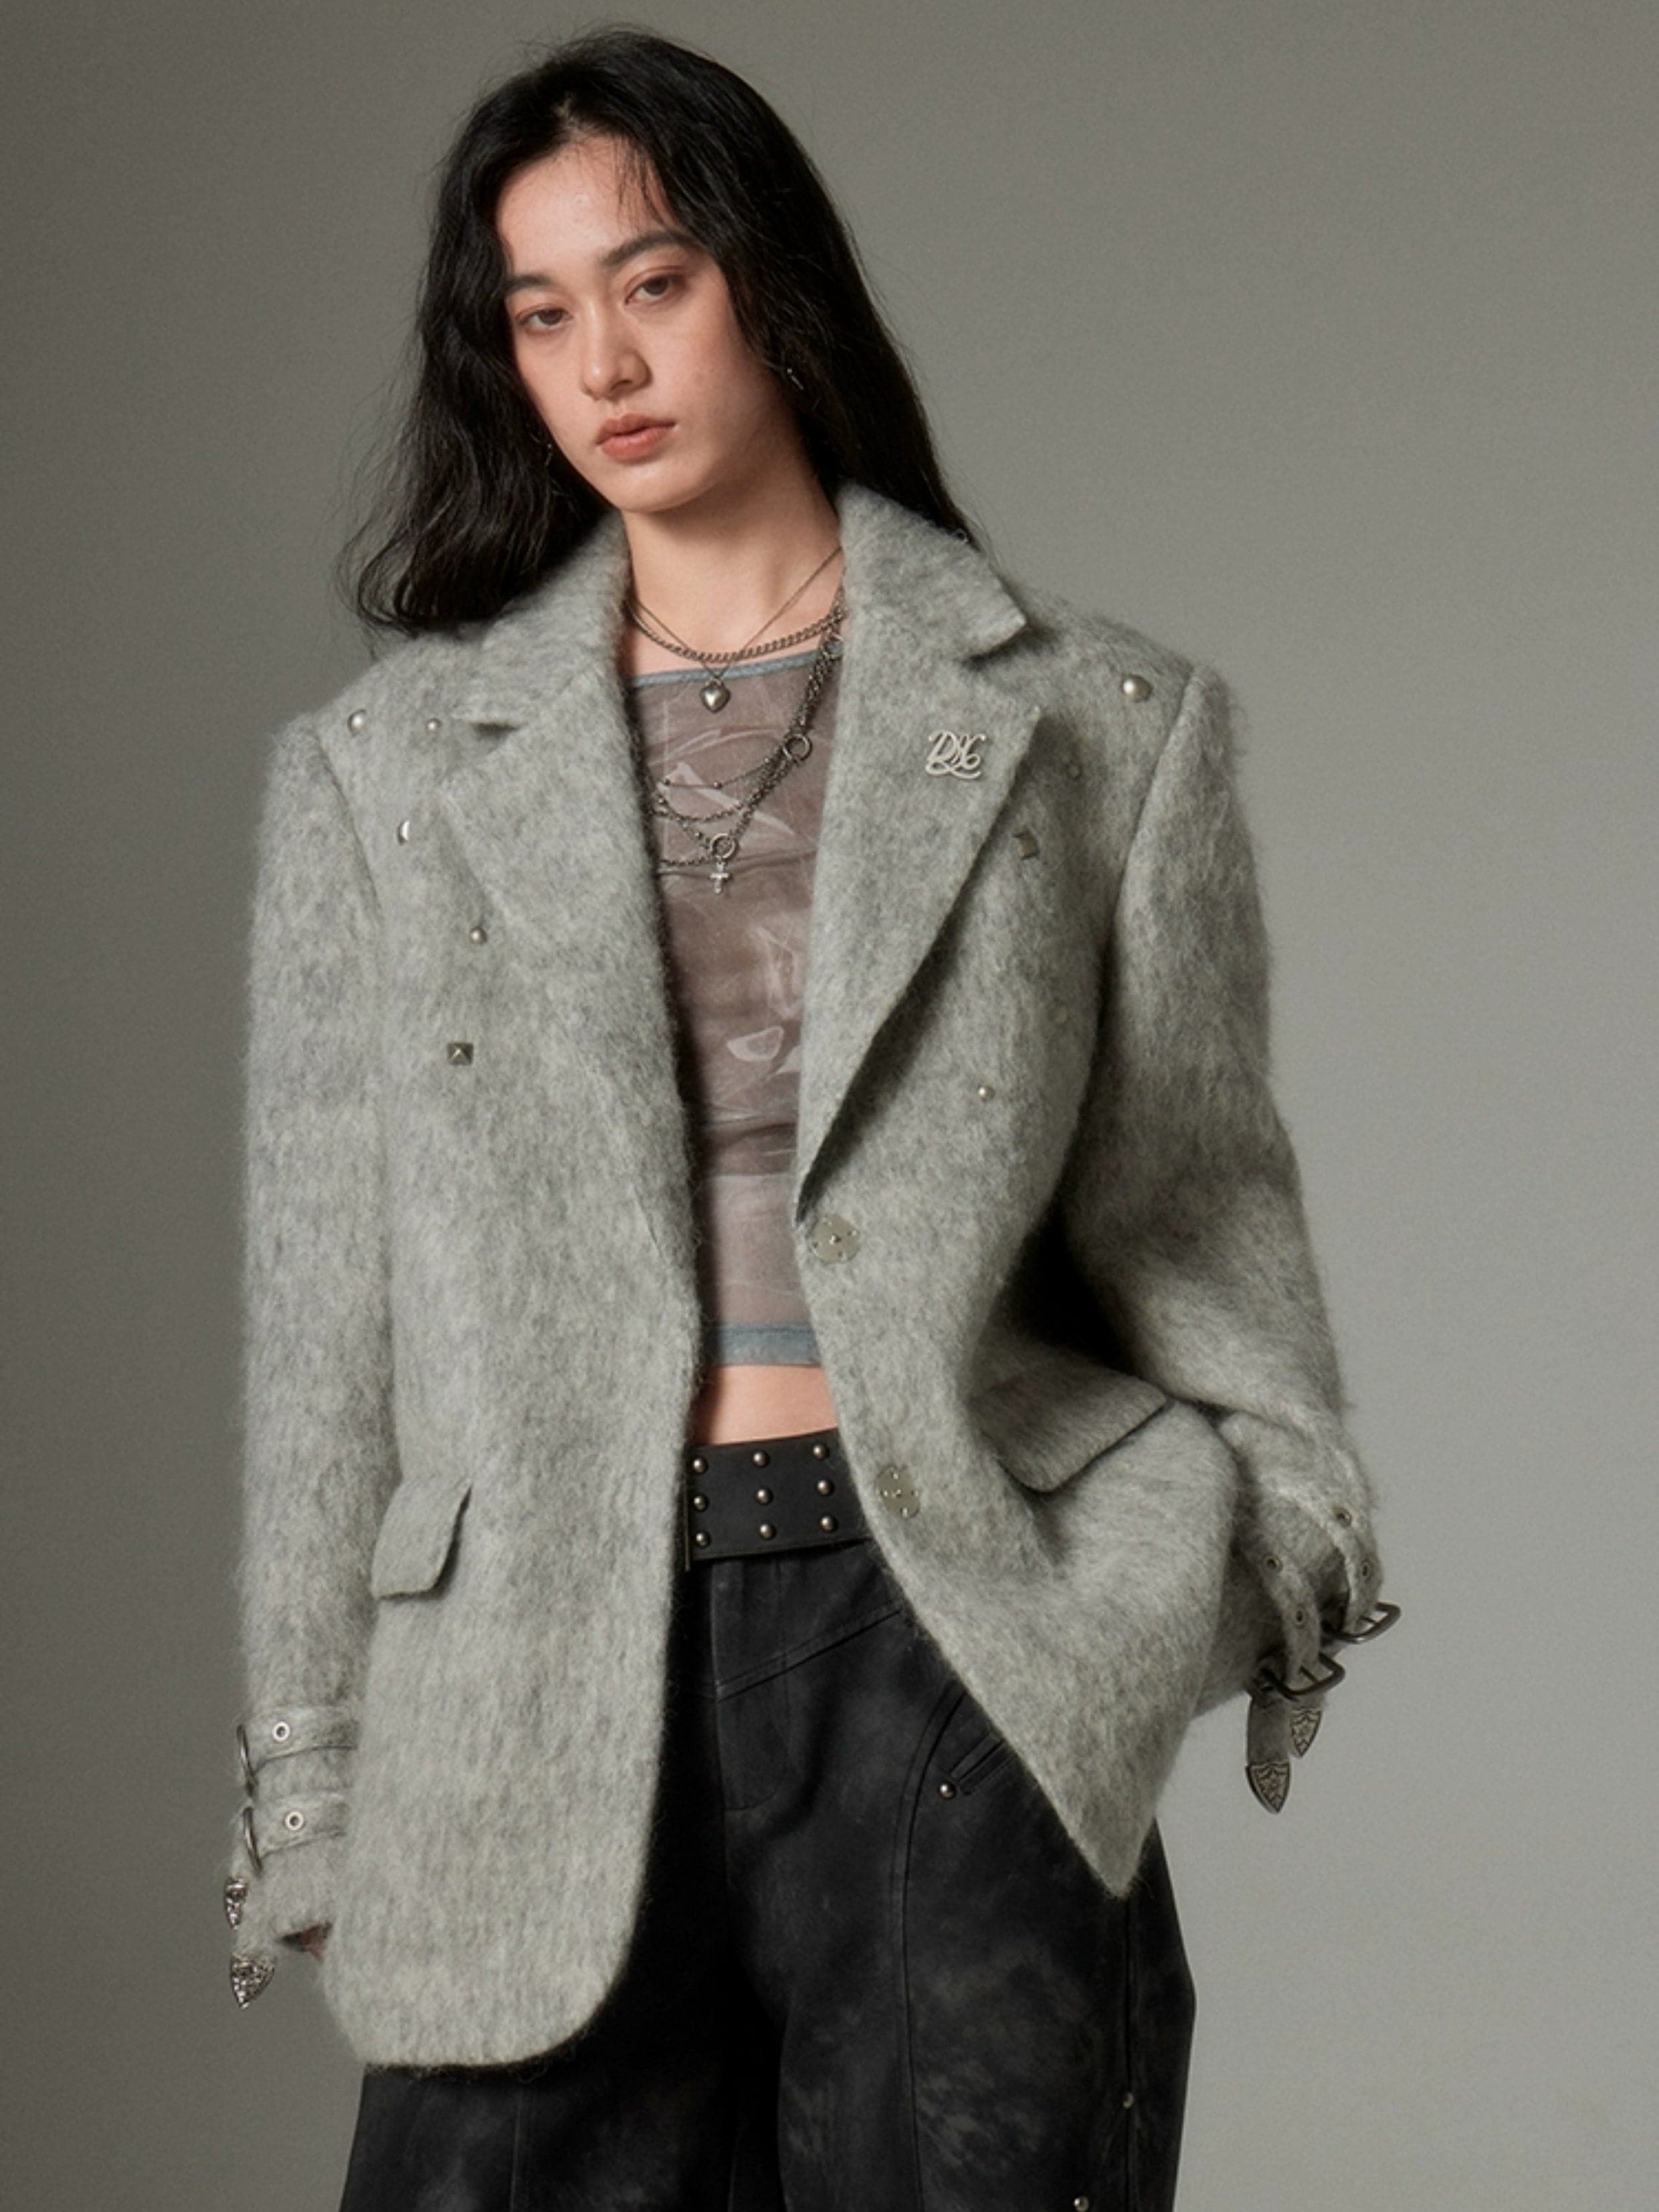 Chic Light Grey Wool-Blend Jacket With Statement Riveted Shoulder Pads - chiclara